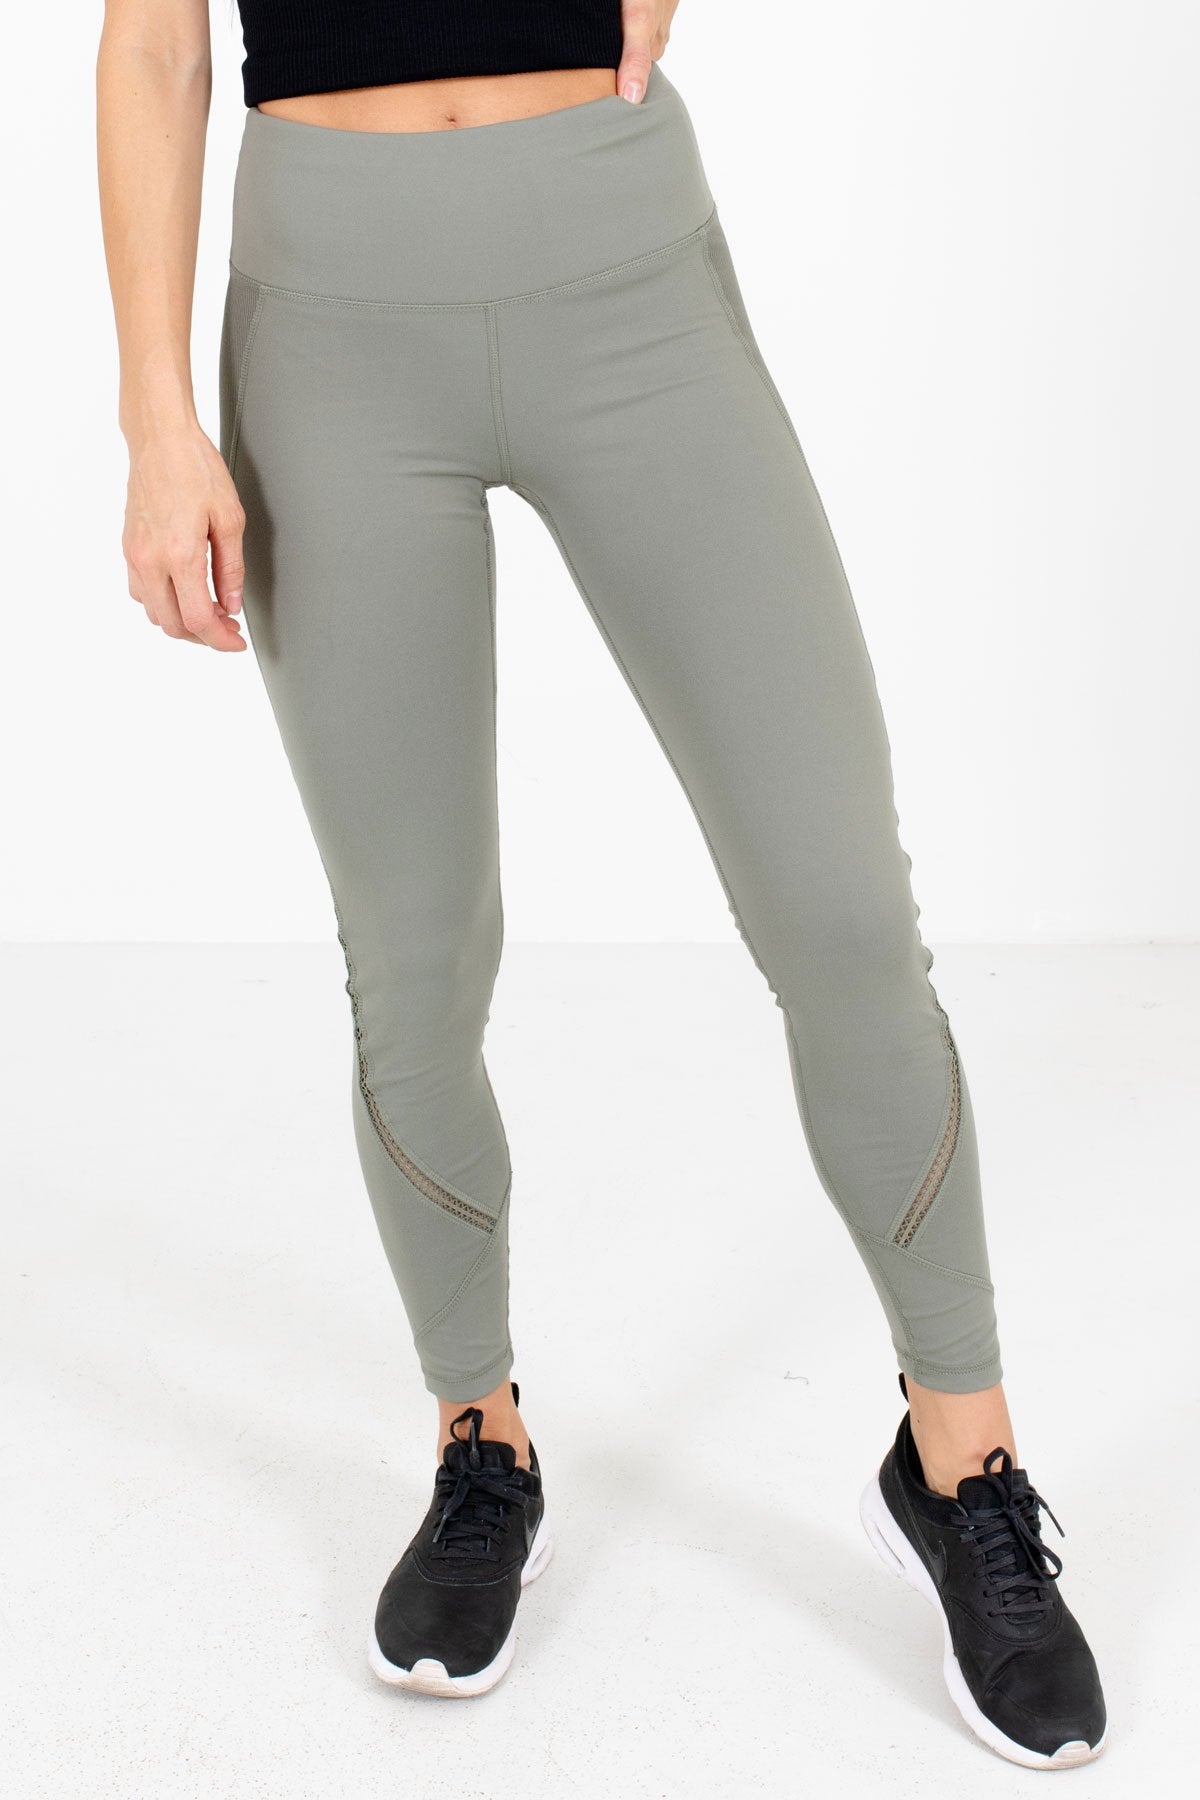 Olive Green Lace Insert Boutique Active Leggings for Women